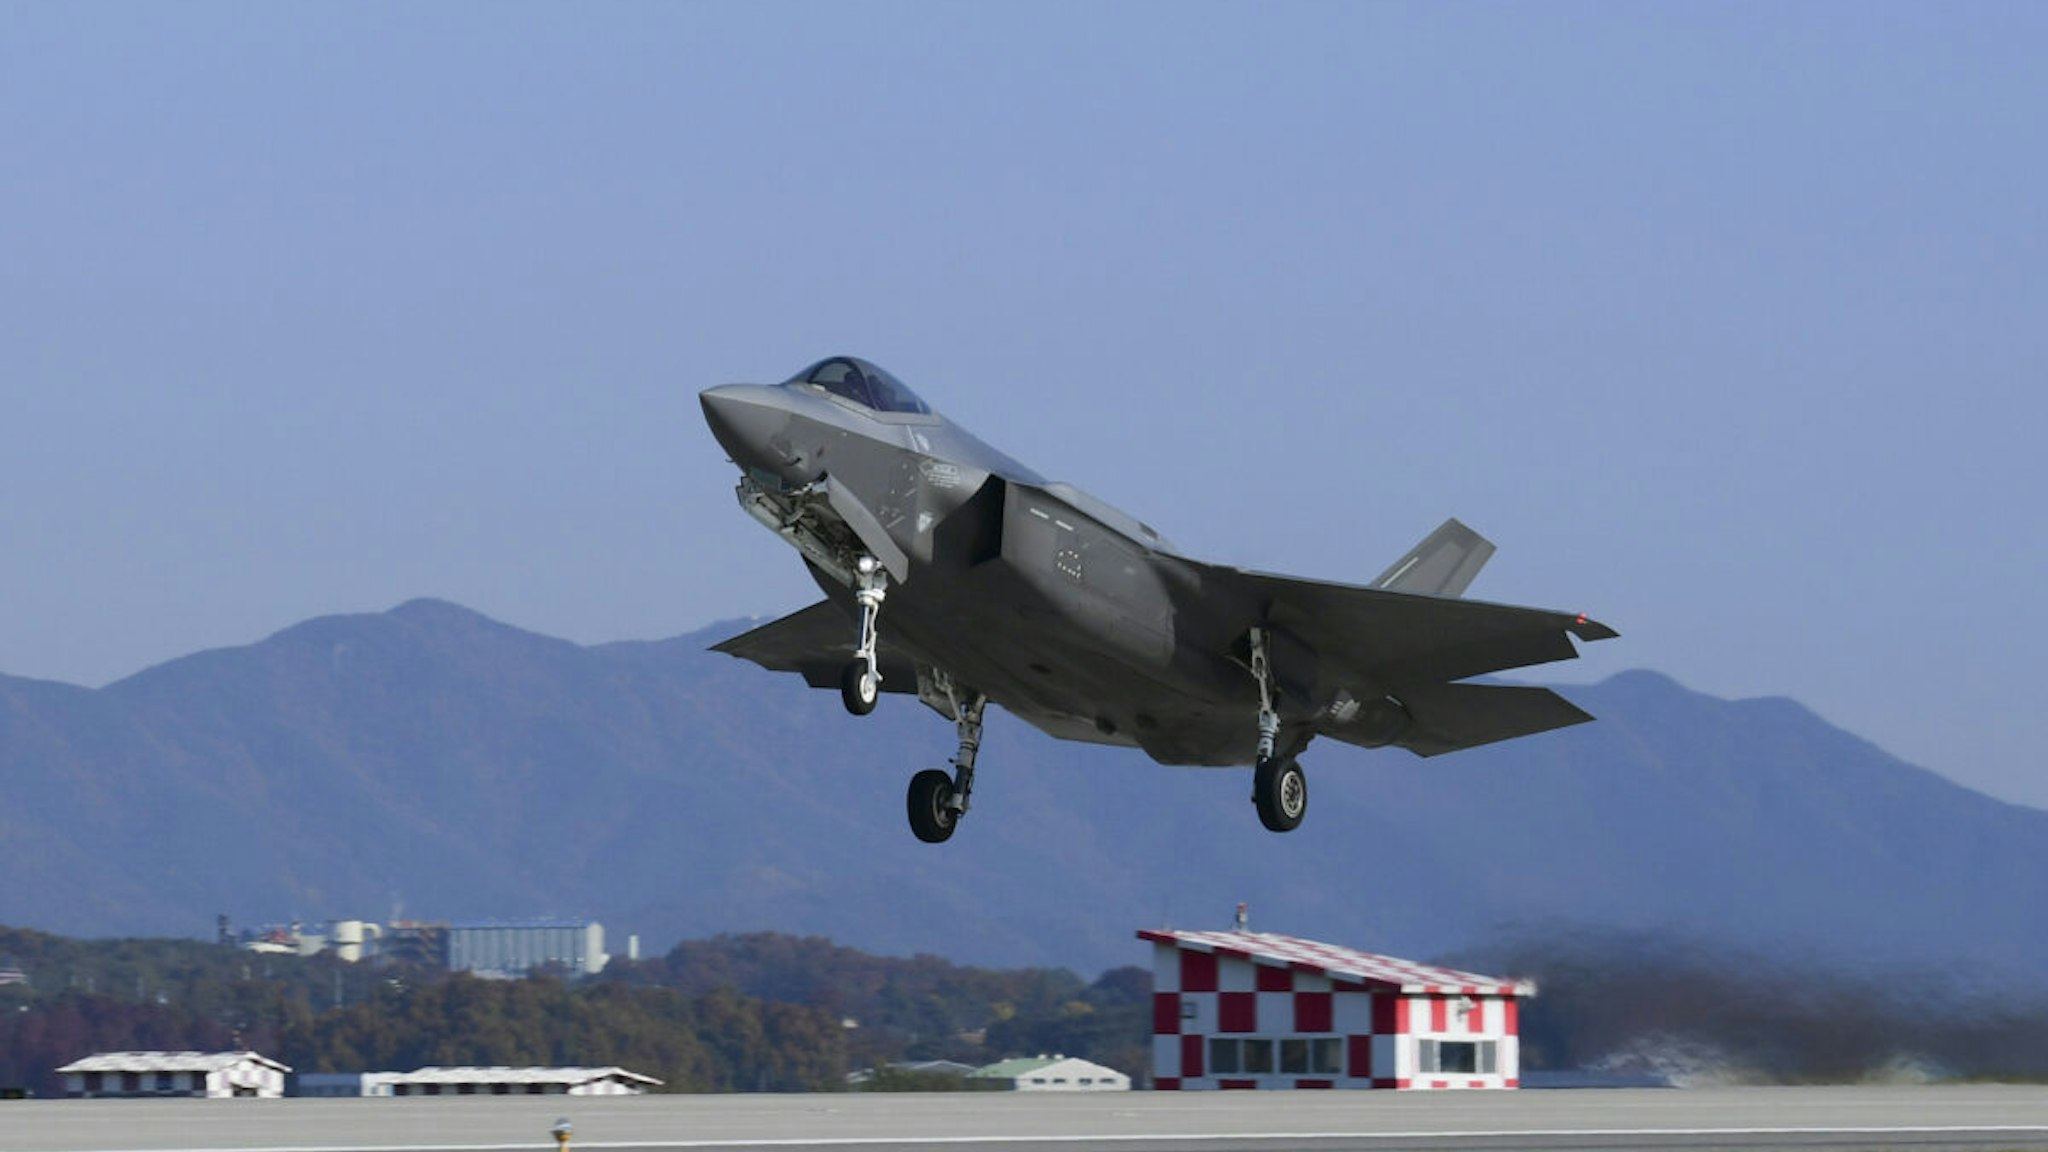 In this handout image released by the South Korean Defense Ministry, a South Korean Air Force F-35A fighter jet takes off from the runway during the "Vigilant Storm" U.S.-South Korea joint aerial drill at Gunsan Air Base on October 31, 2022 in Gunsan, South Korea